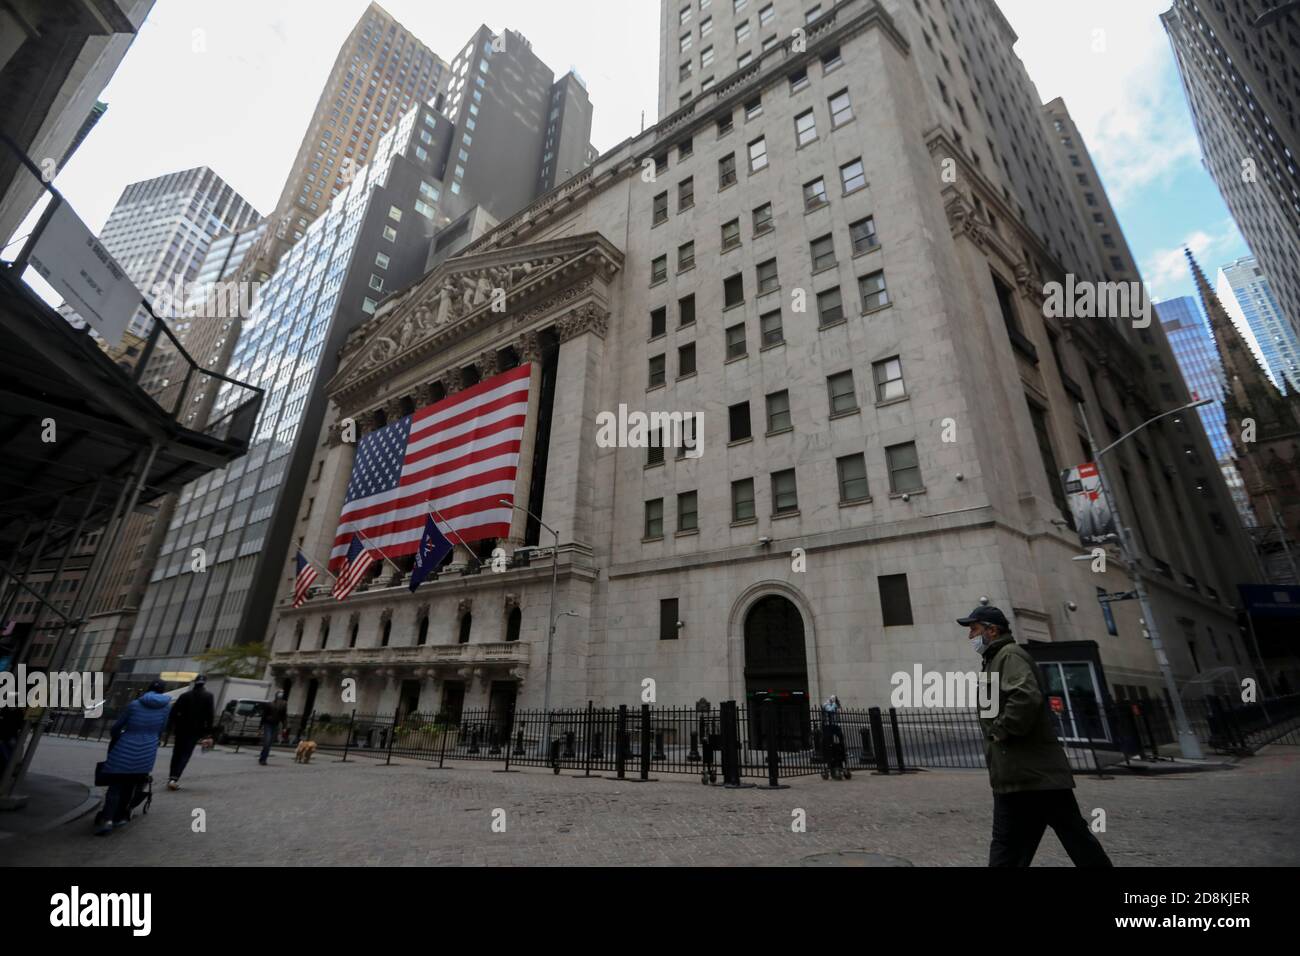 New York, USA. 30th Oct, 2020. Pedestrians walk past the New York Stock Exchange in New York, the United States, Oct. 30, 2020. U.S. stocks closed lower on Friday, as a pronounced slide in tech sector weighed on the market. The Dow Jones Industrial Average fell 157.51 points, or 0.59 percent, to 26,501.60. The S&P 500 was down 40.15 points, or 1.21 percent, to 3,269.96. The Nasdaq Composite Index shed 274.00 points, or 2.45 percent, to 10,911.59. Credit: Wang Ying/Xinhua/Alamy Live News Stock Photo